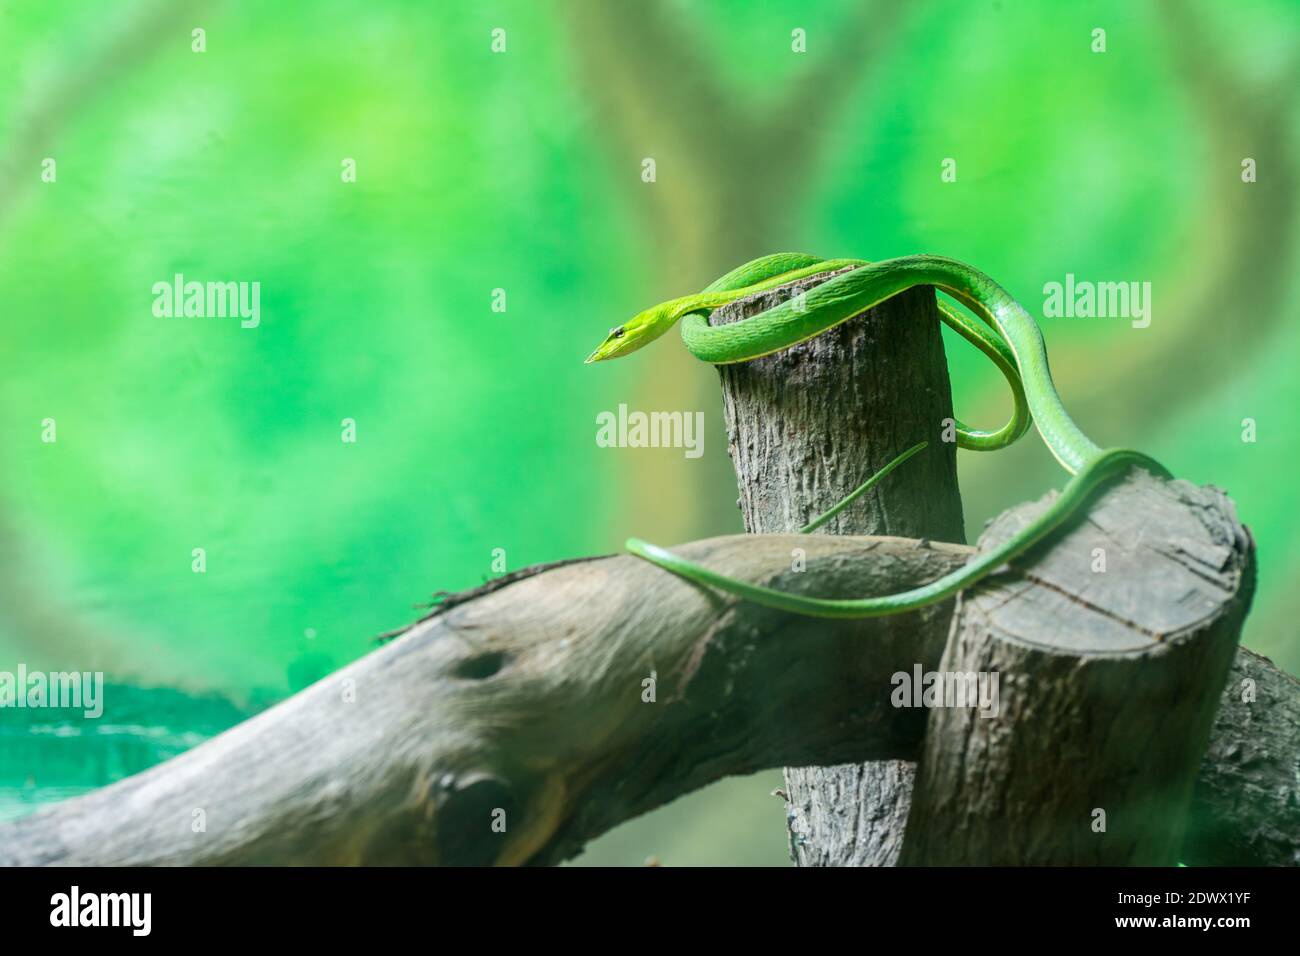 Asian vine snake, green Ahaetulla prasina snake crawling at a dry wood in Nehru Zoological Park, Hyderabad, India Stock Photo